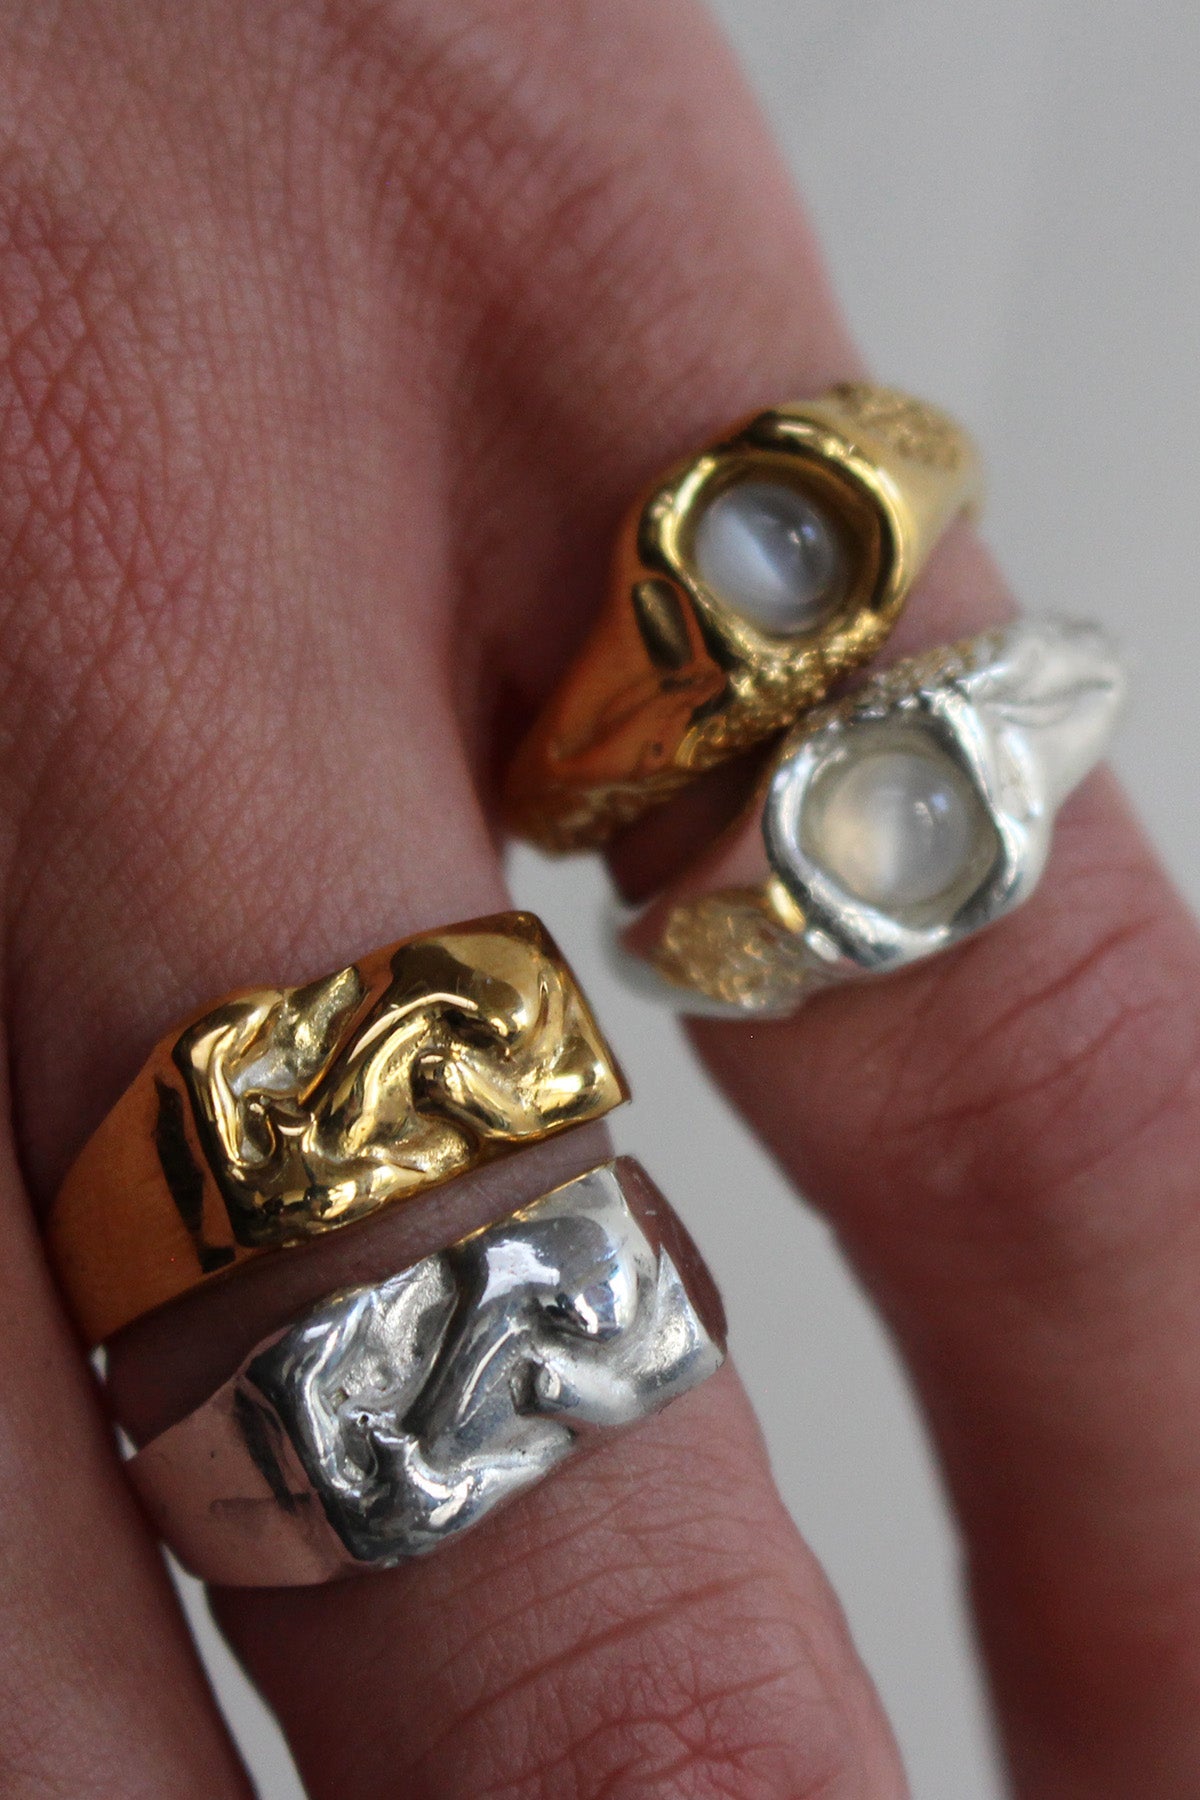 Gold imperfect ring